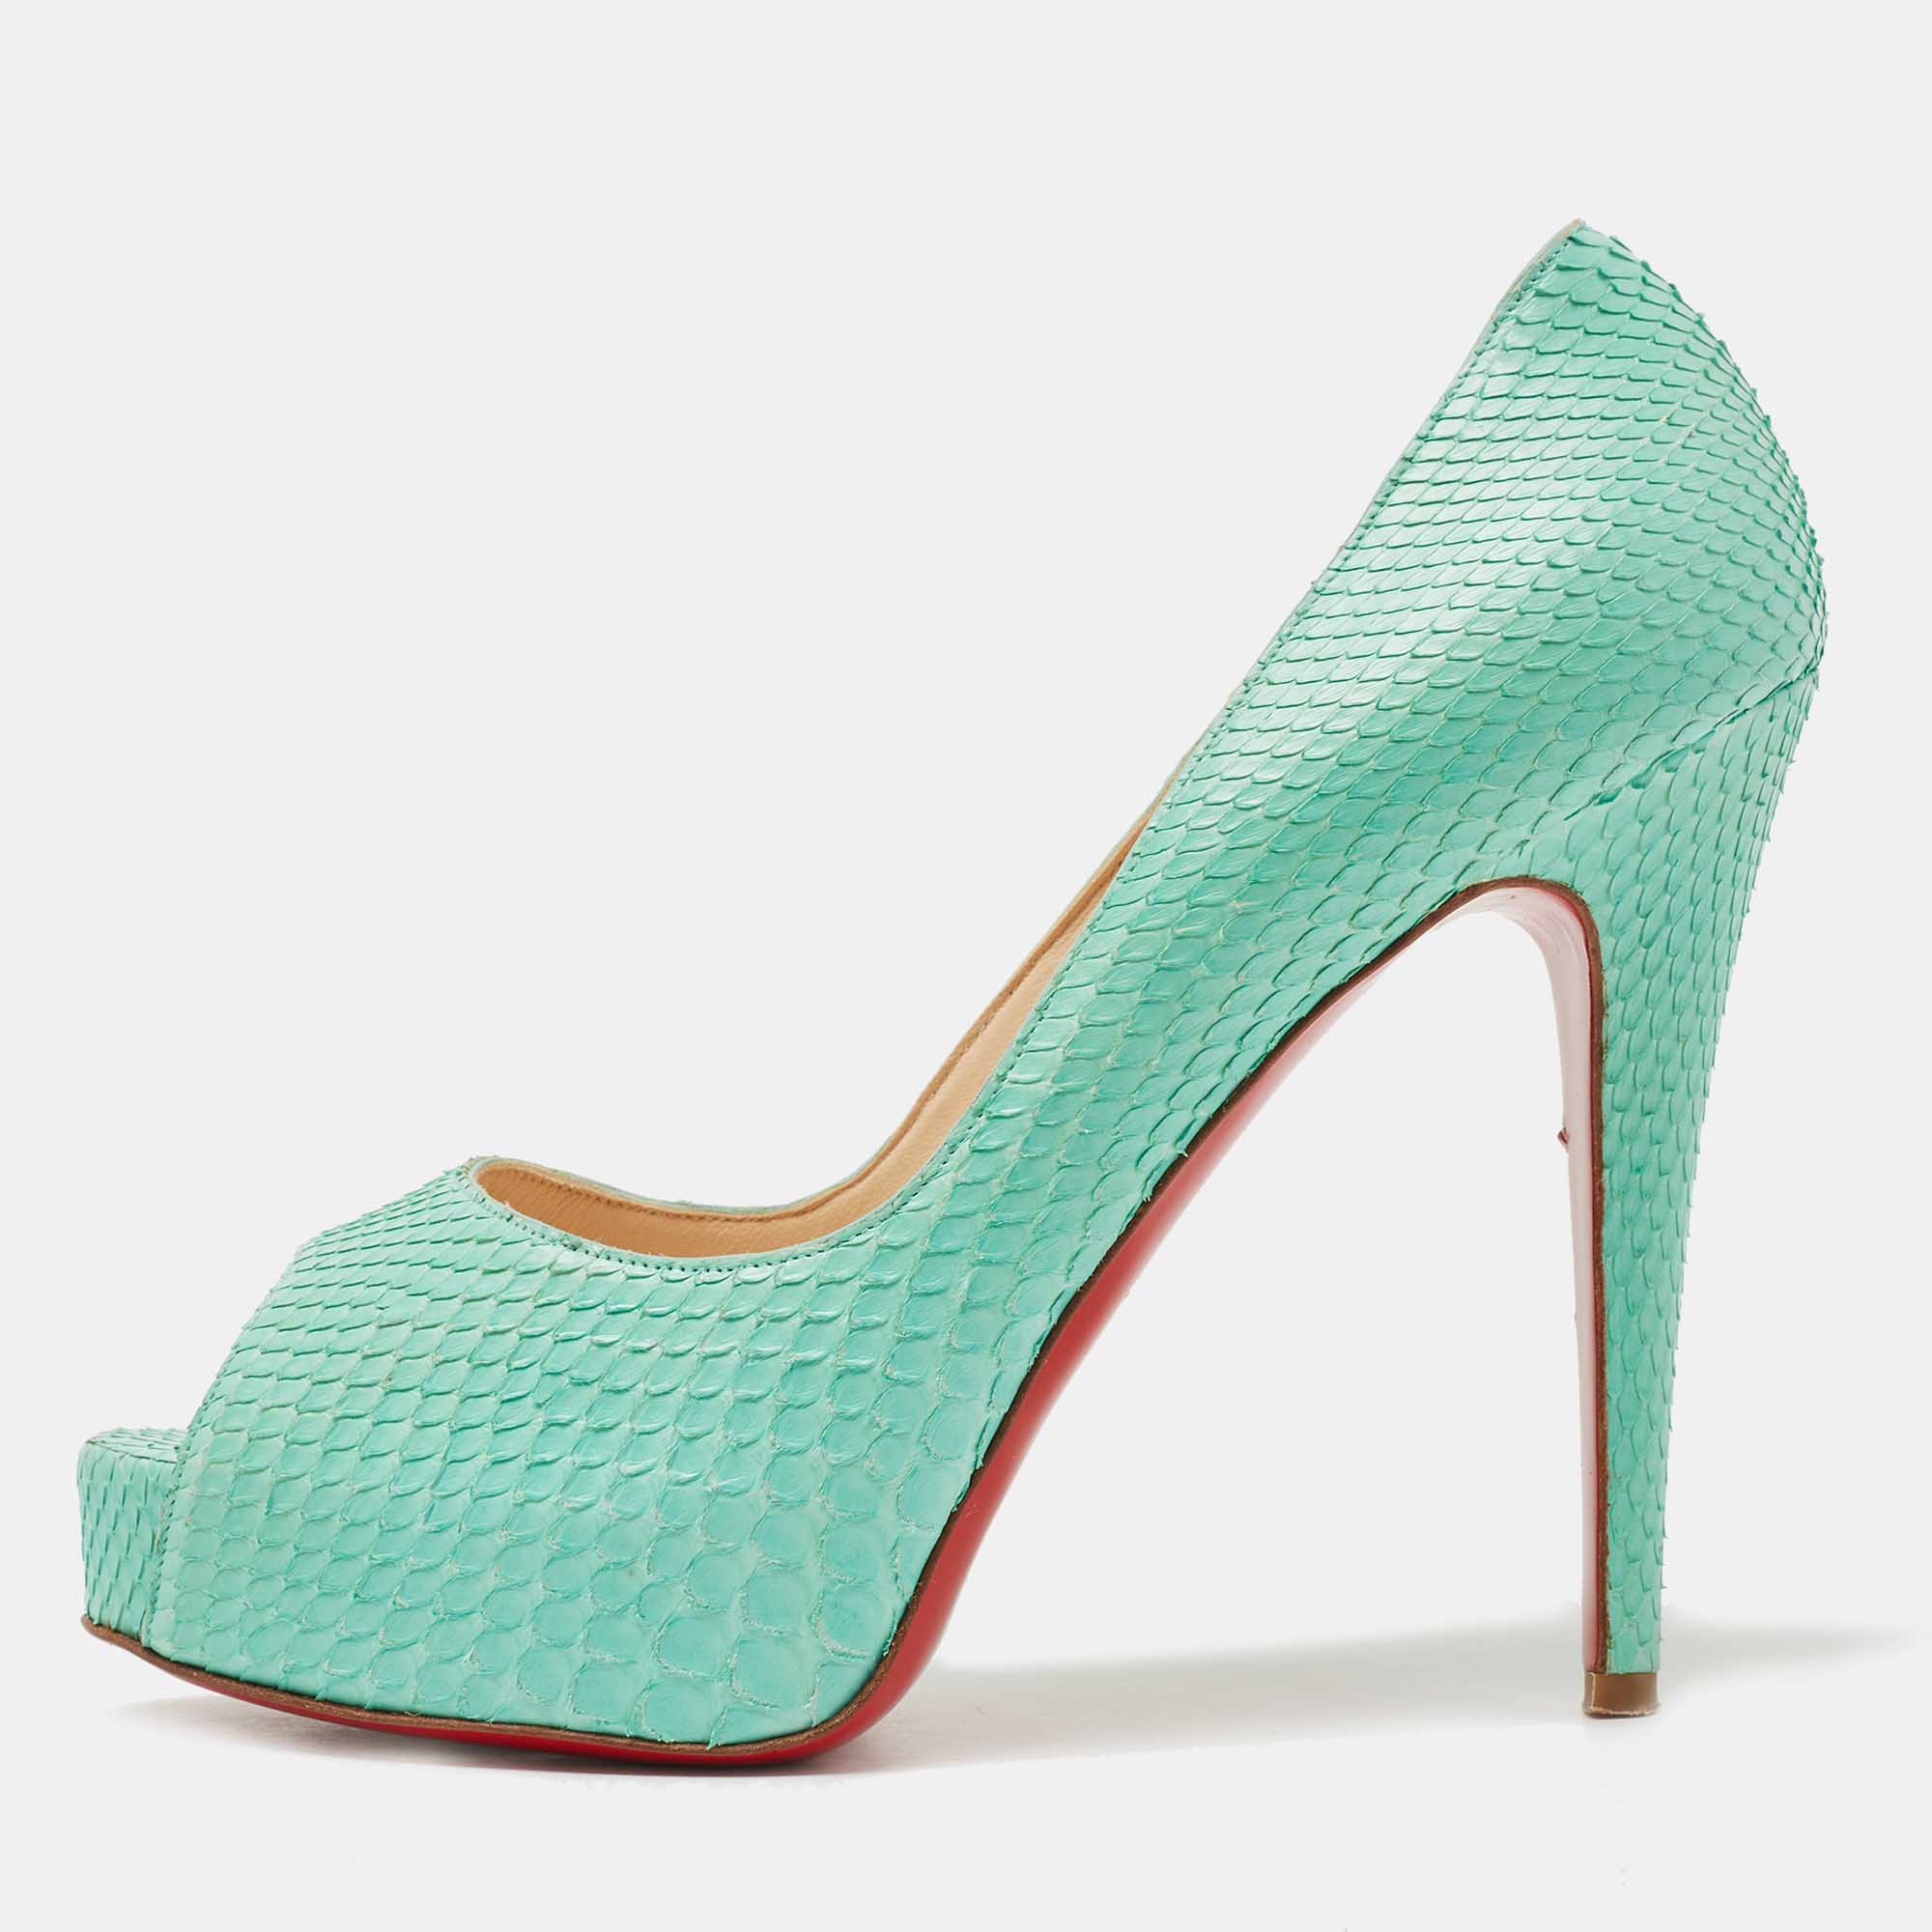 Pre-owned Christian Louboutin Turquoise Python Very Prive Pumps Size 38.5 In Green